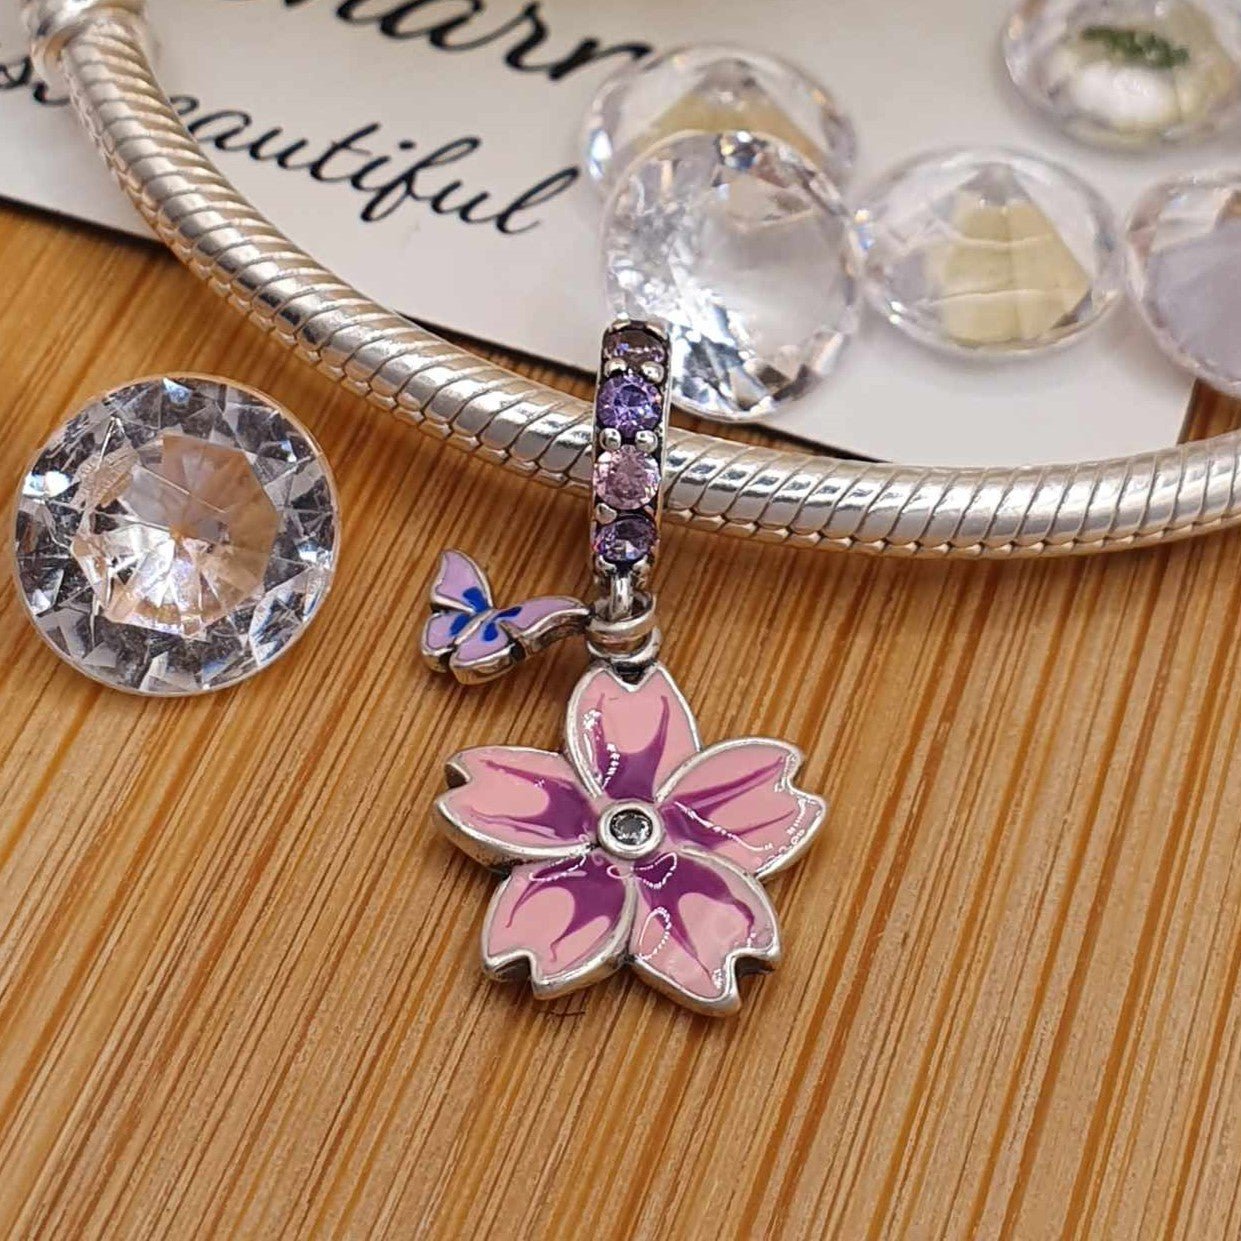 Pink Orchid Charm - The Bee Charm